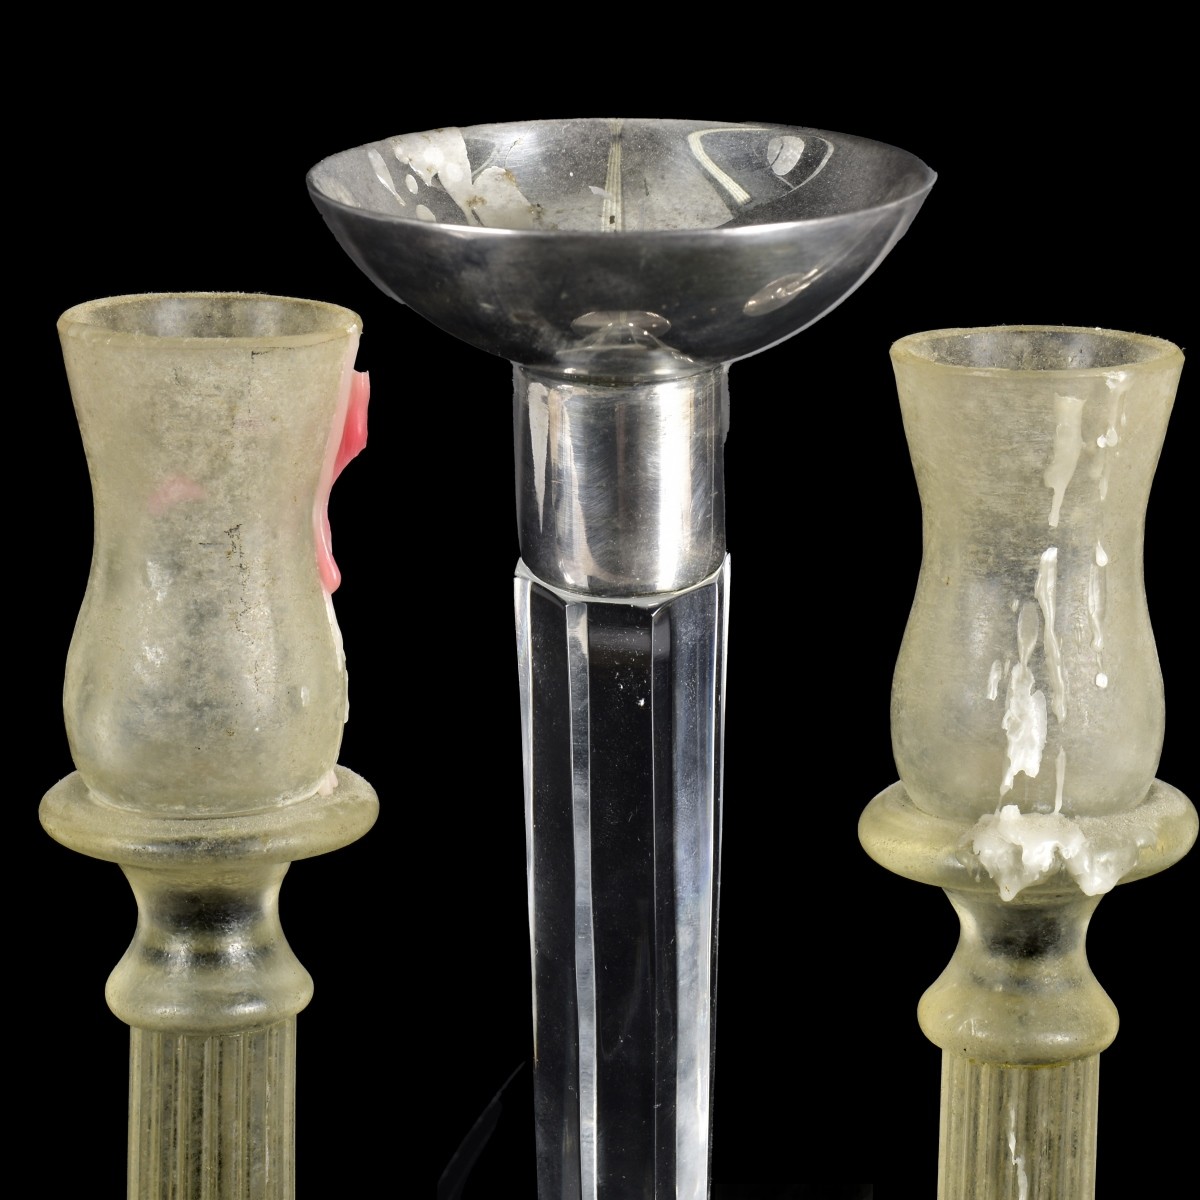 Two Pairs of Candlesticks